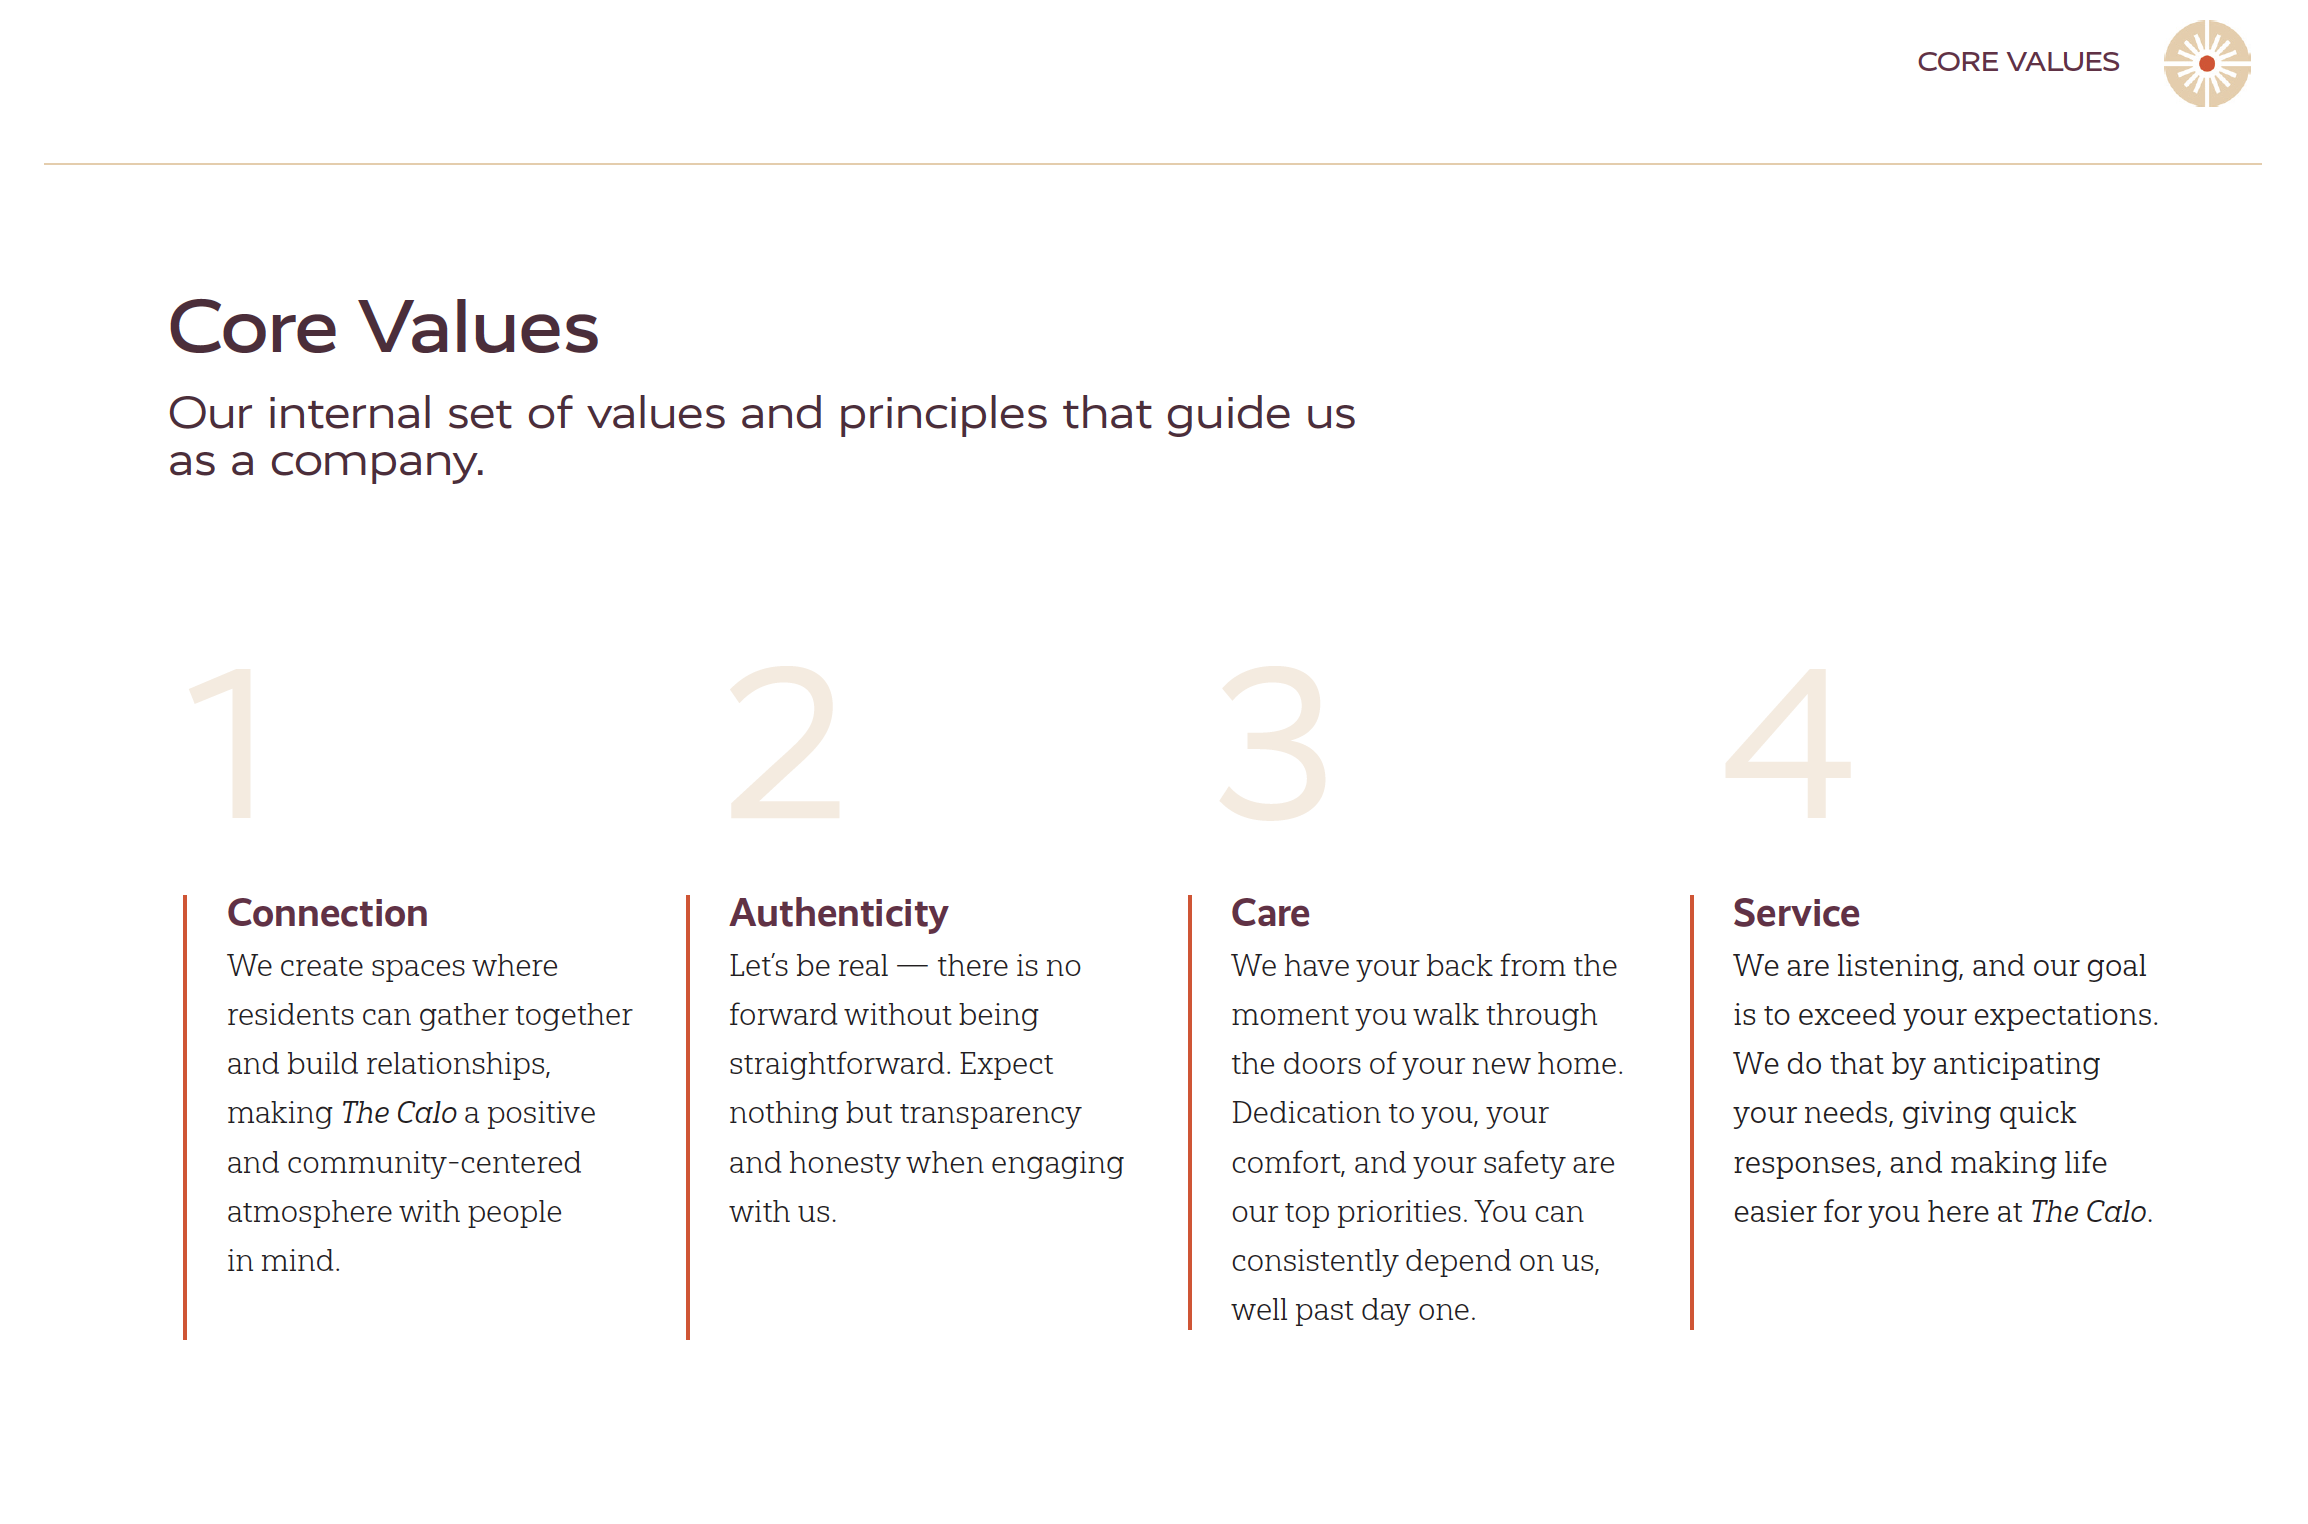 core values in a brand guide for The Calo